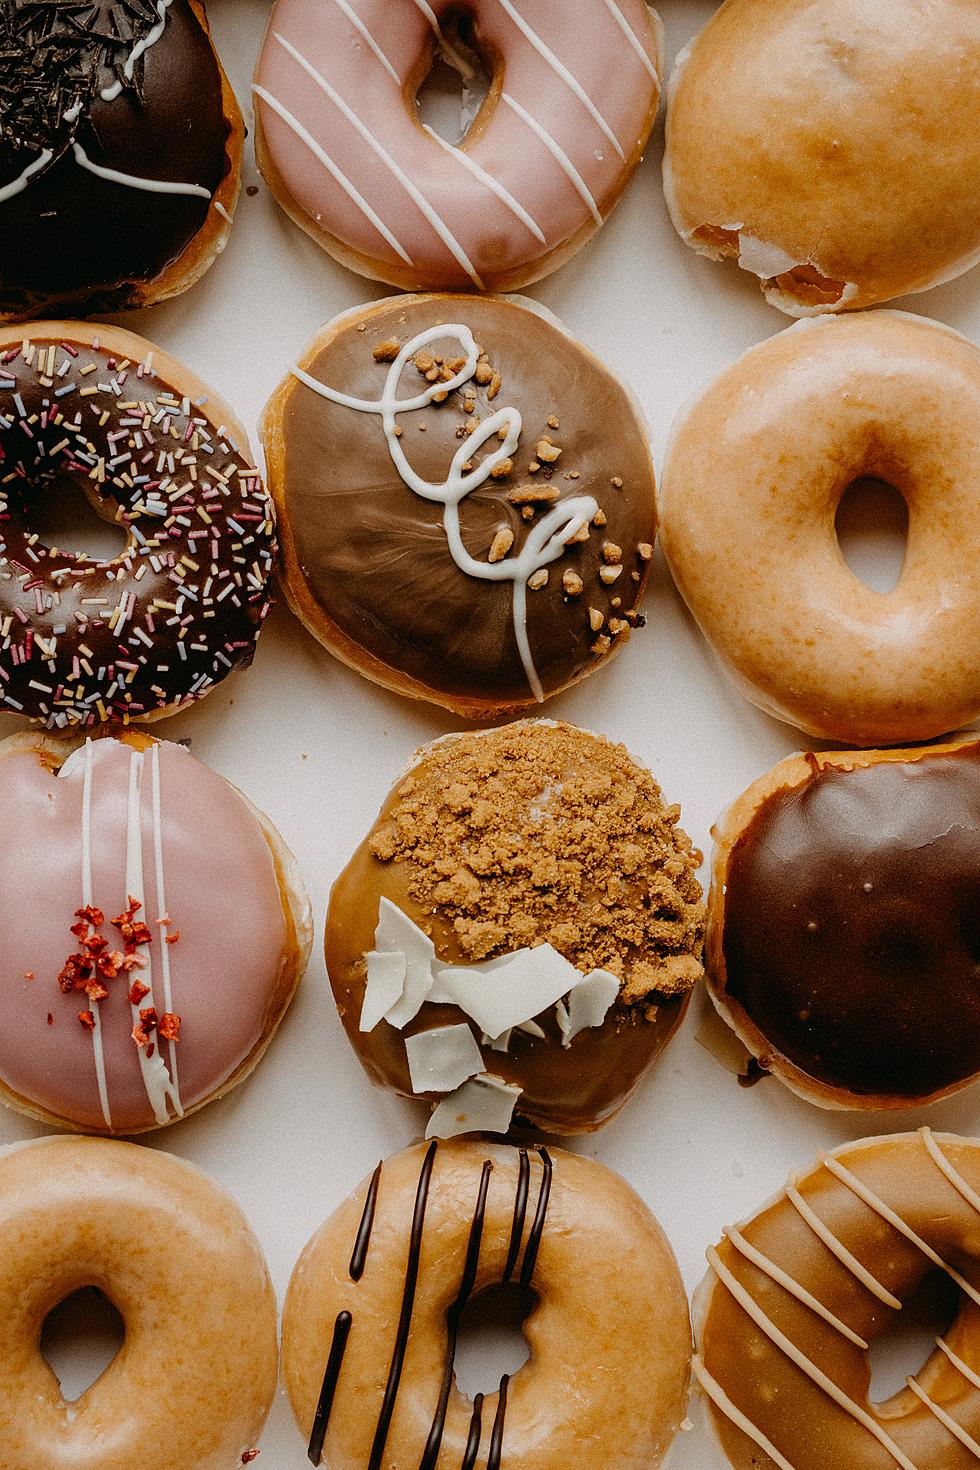 Boise’s Best Donuts: Savoring The Top Donuts In Treasure Valley